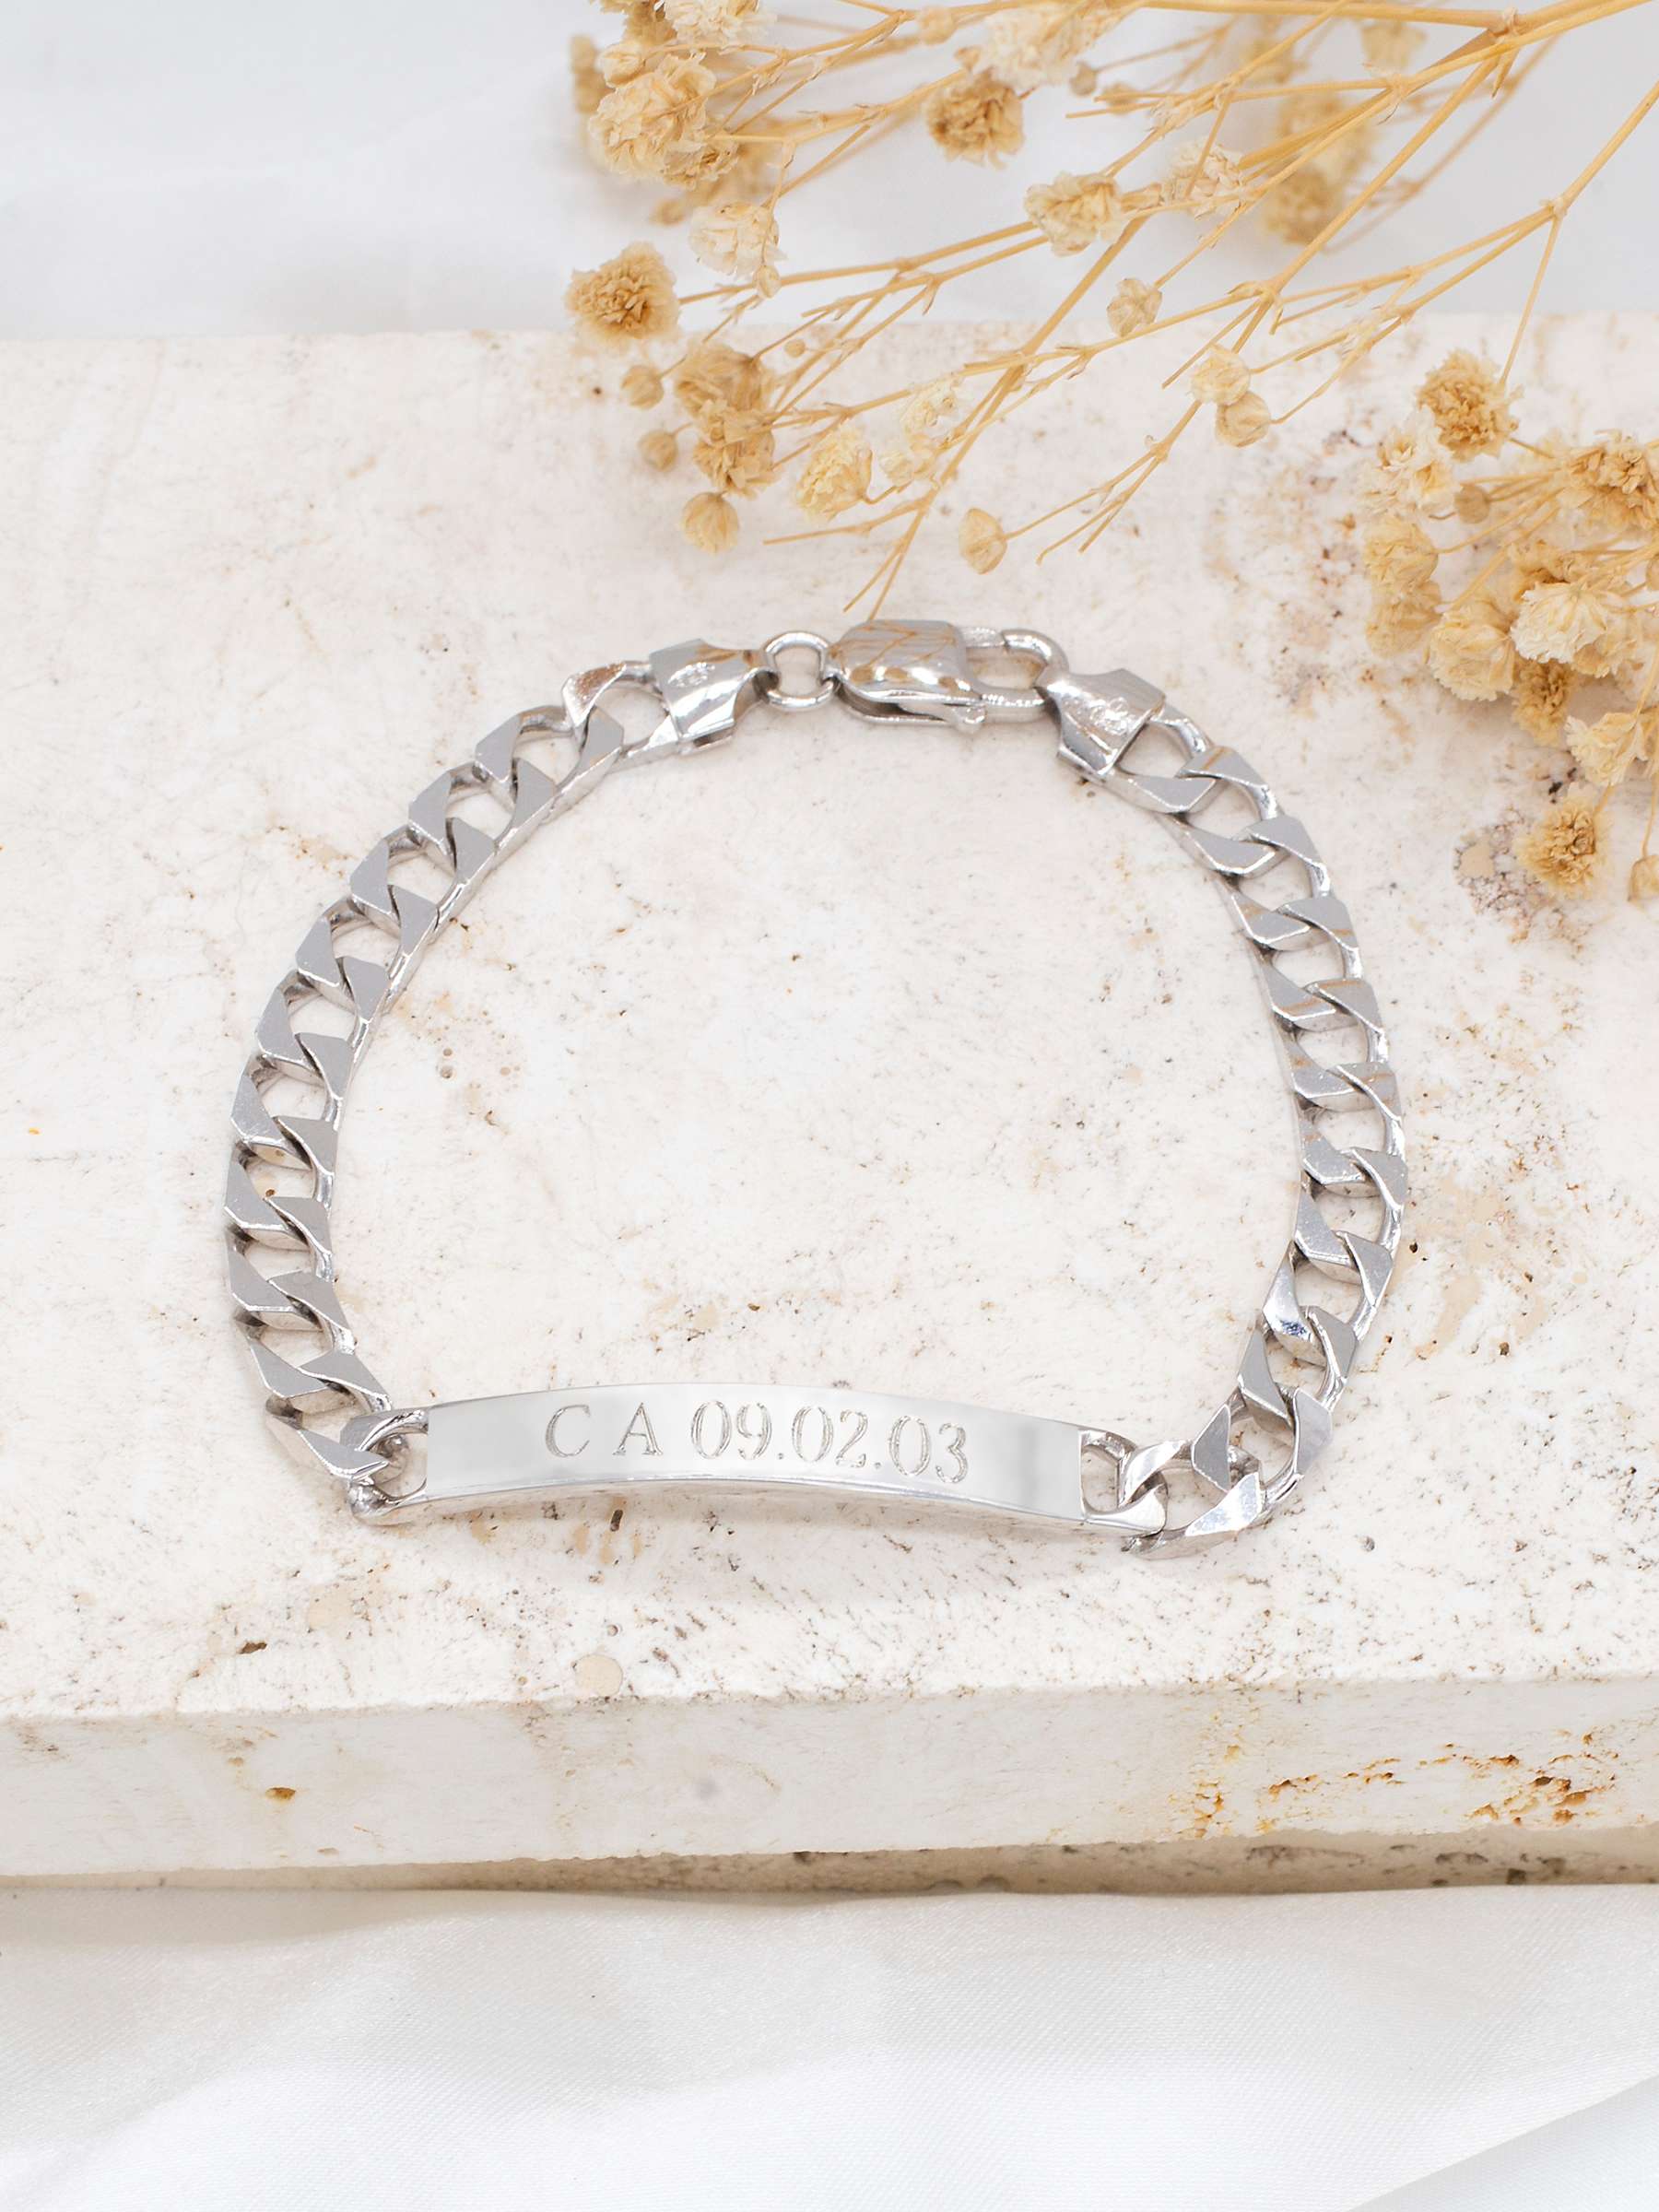 Buy IBB Personalised Sterling Silver ID Curb Chain Bracelet, Silver Online at johnlewis.com